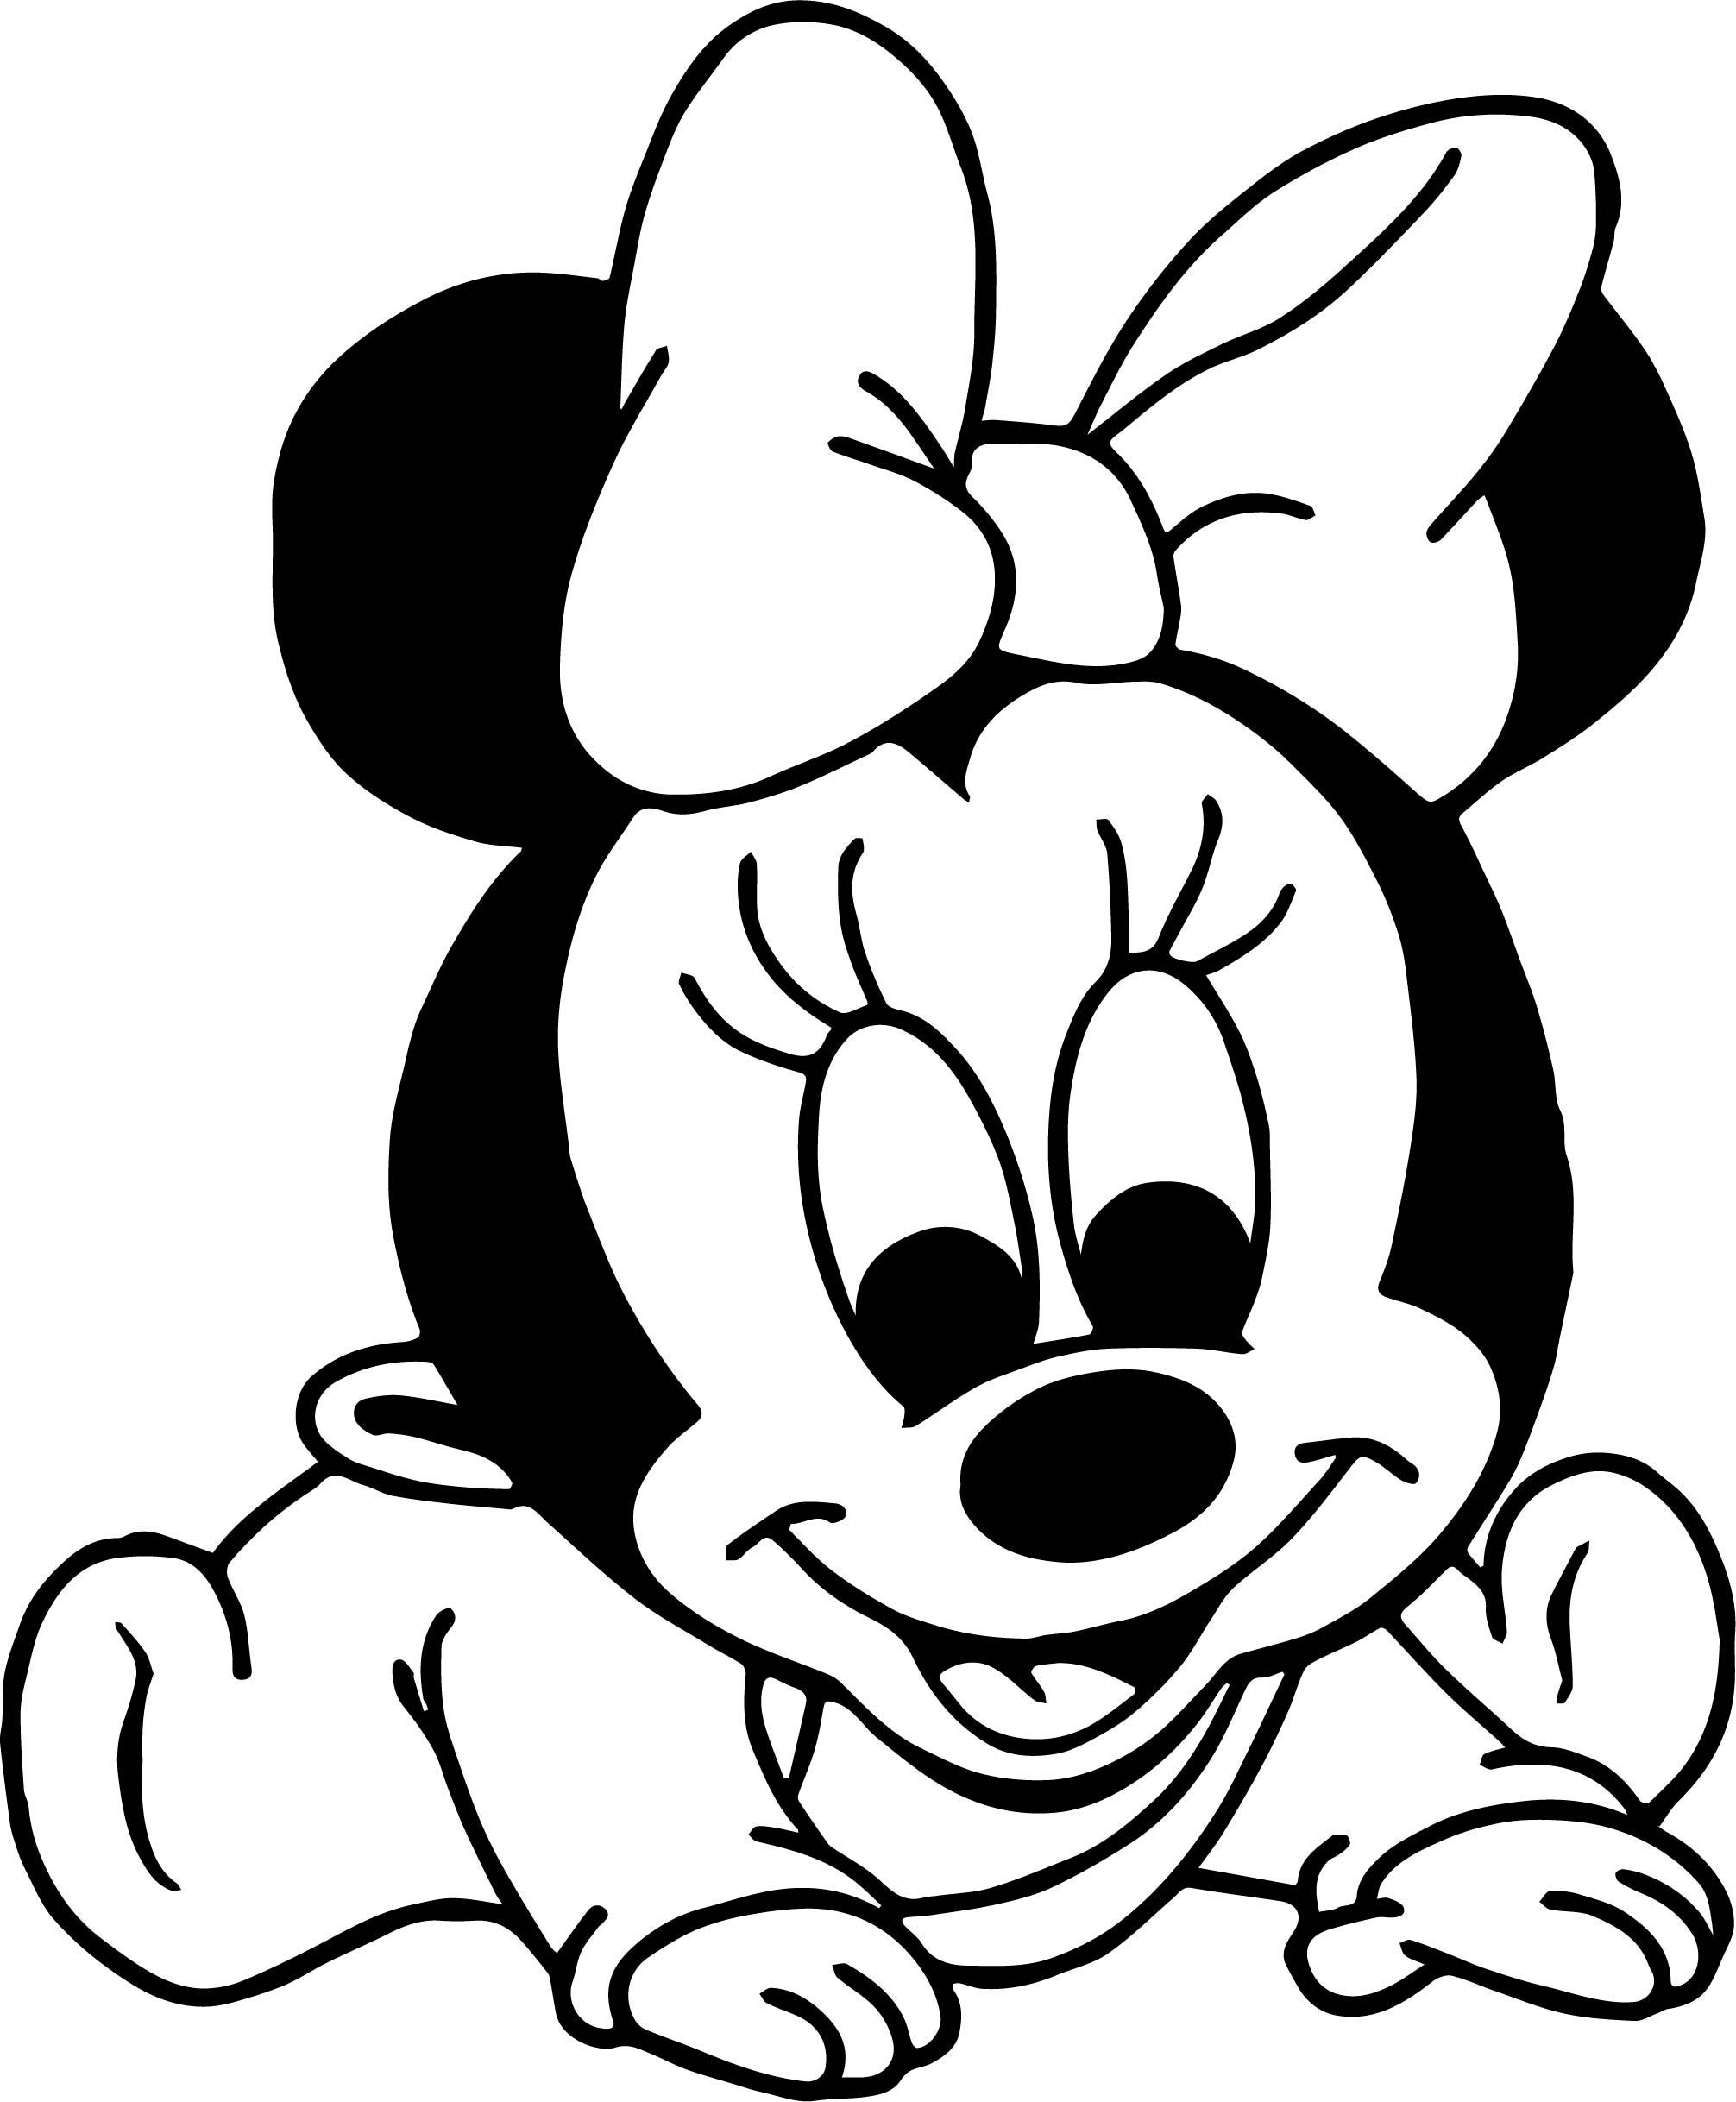 Cute Minnie Mouse Baby Coloring Pages - SheetalColor.com